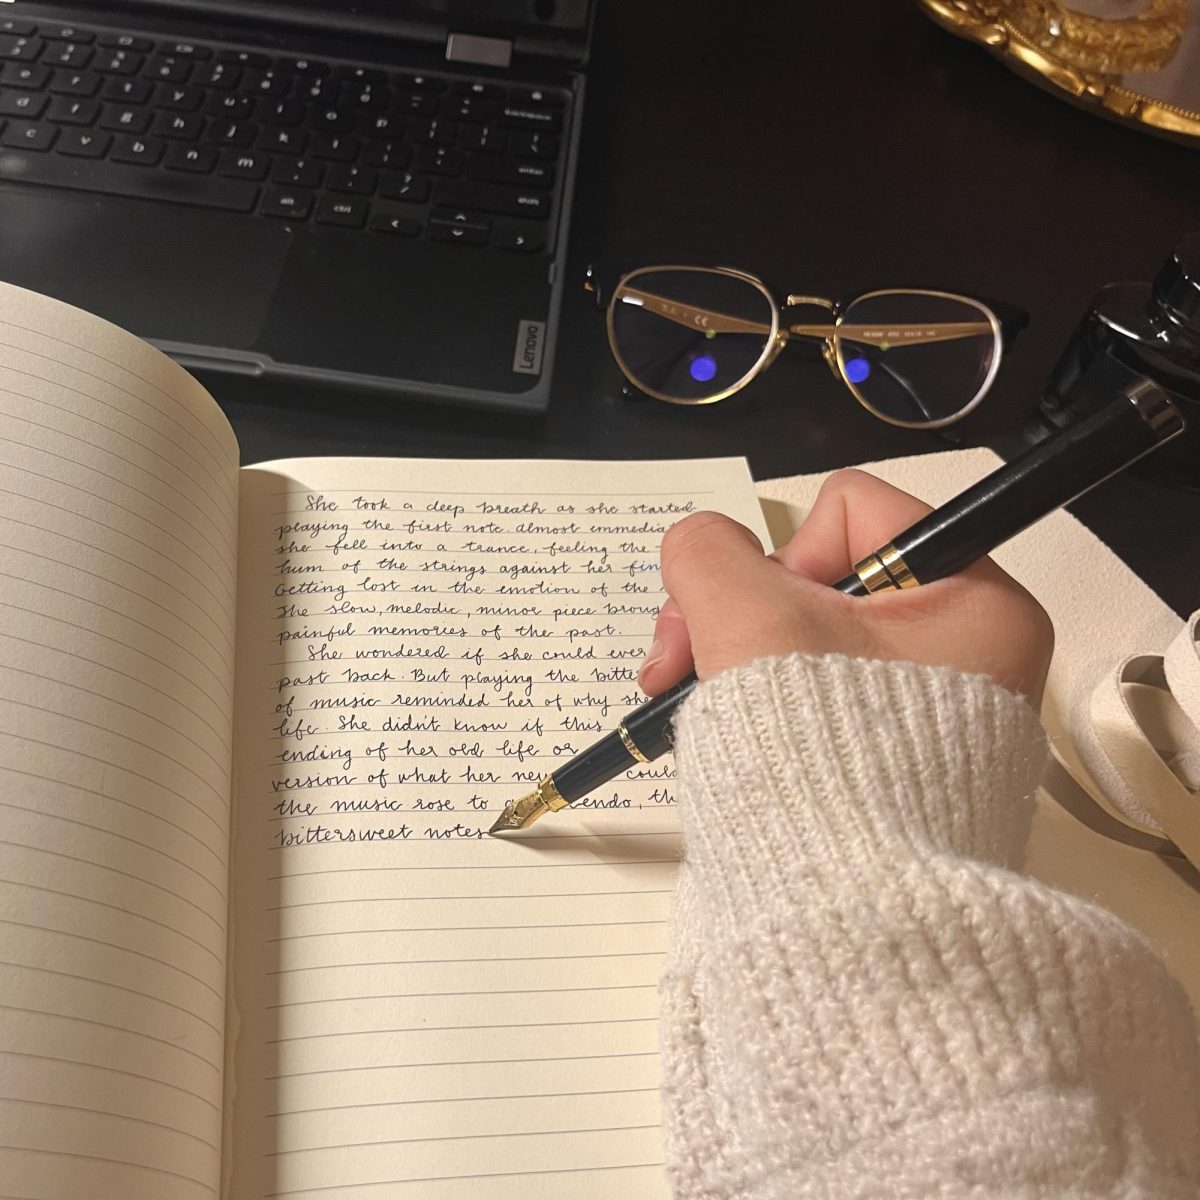 The art of creative writing spurs from both the imagination and the passion for expressing thoughts into words. What better way to write than by putting pen to paper?